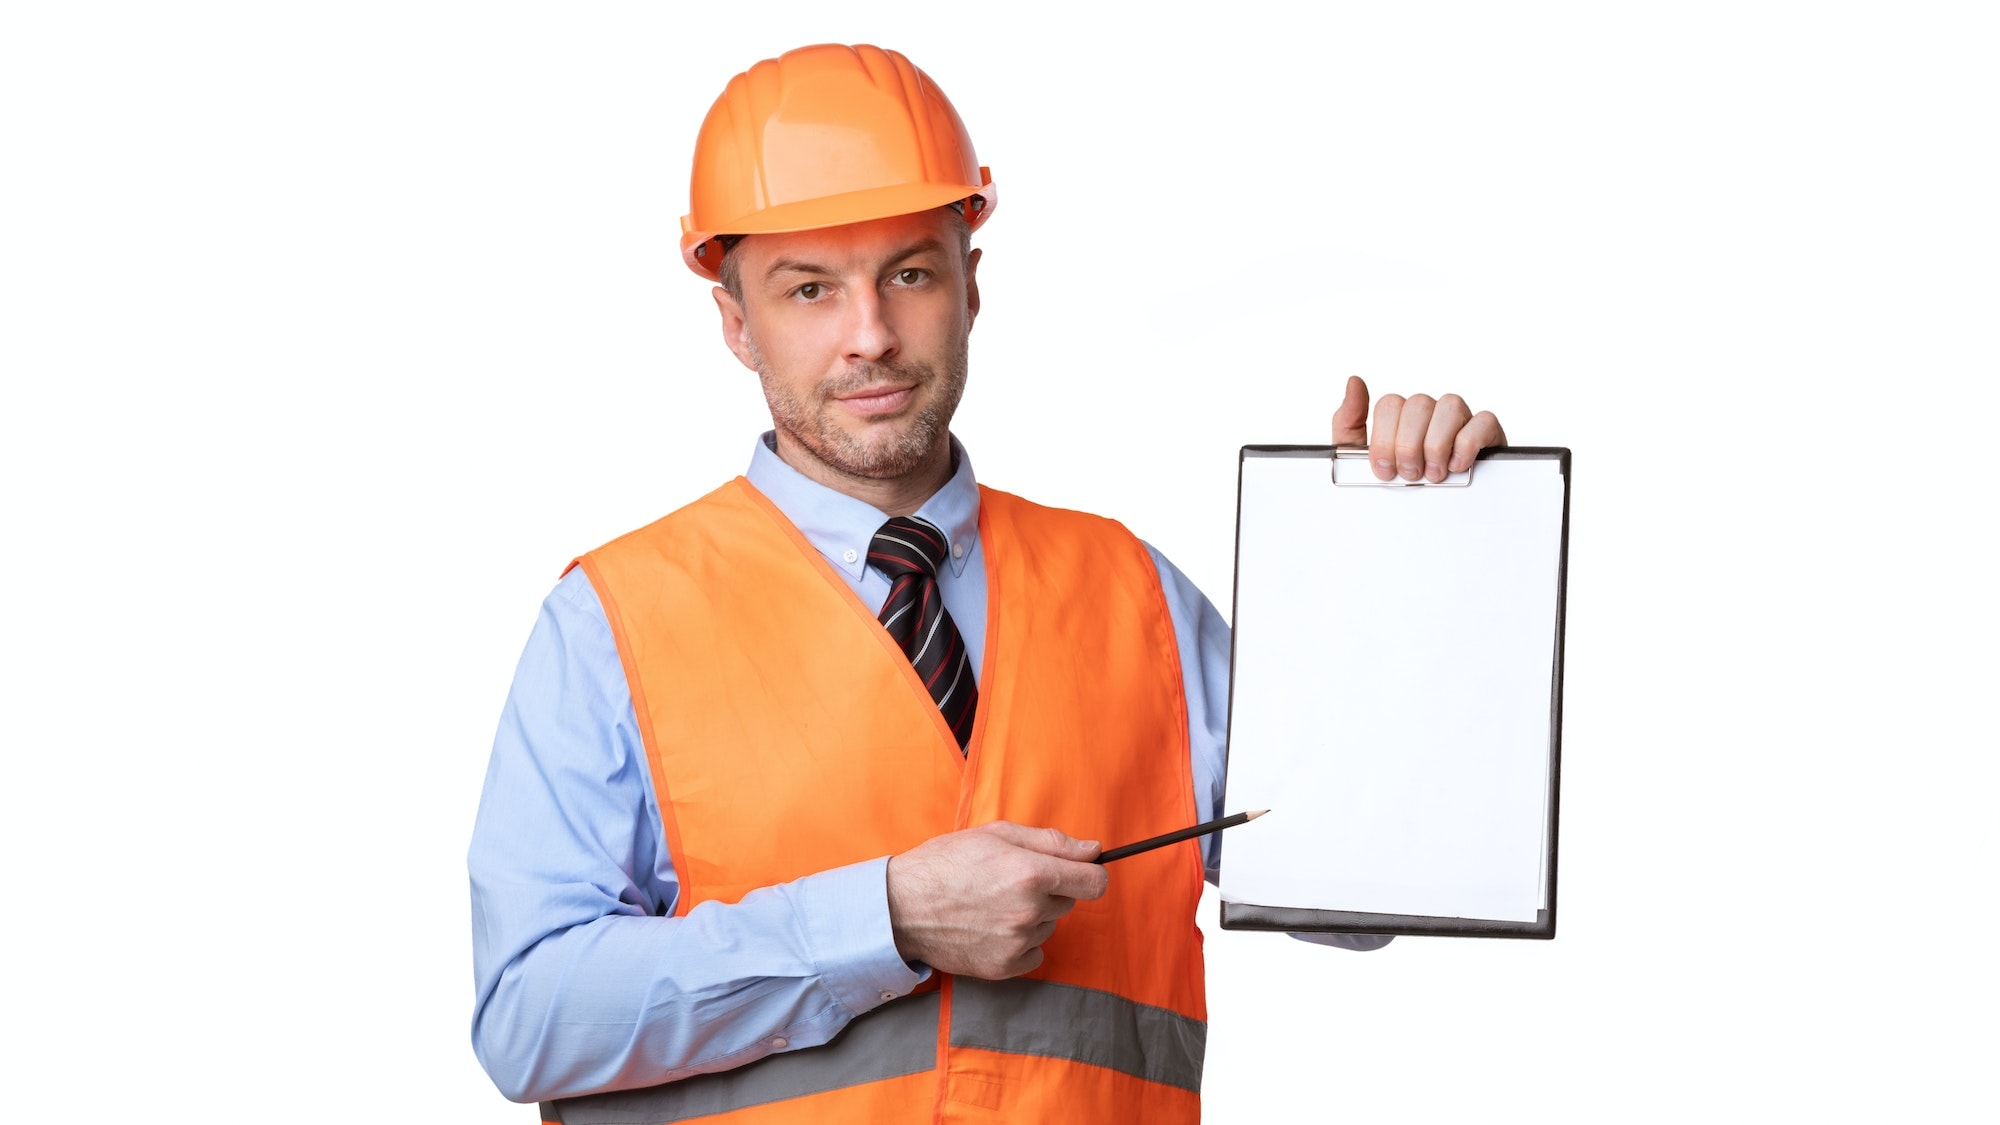 Professional Builder Offering Sign Labor Contract Showing Folder, White Background